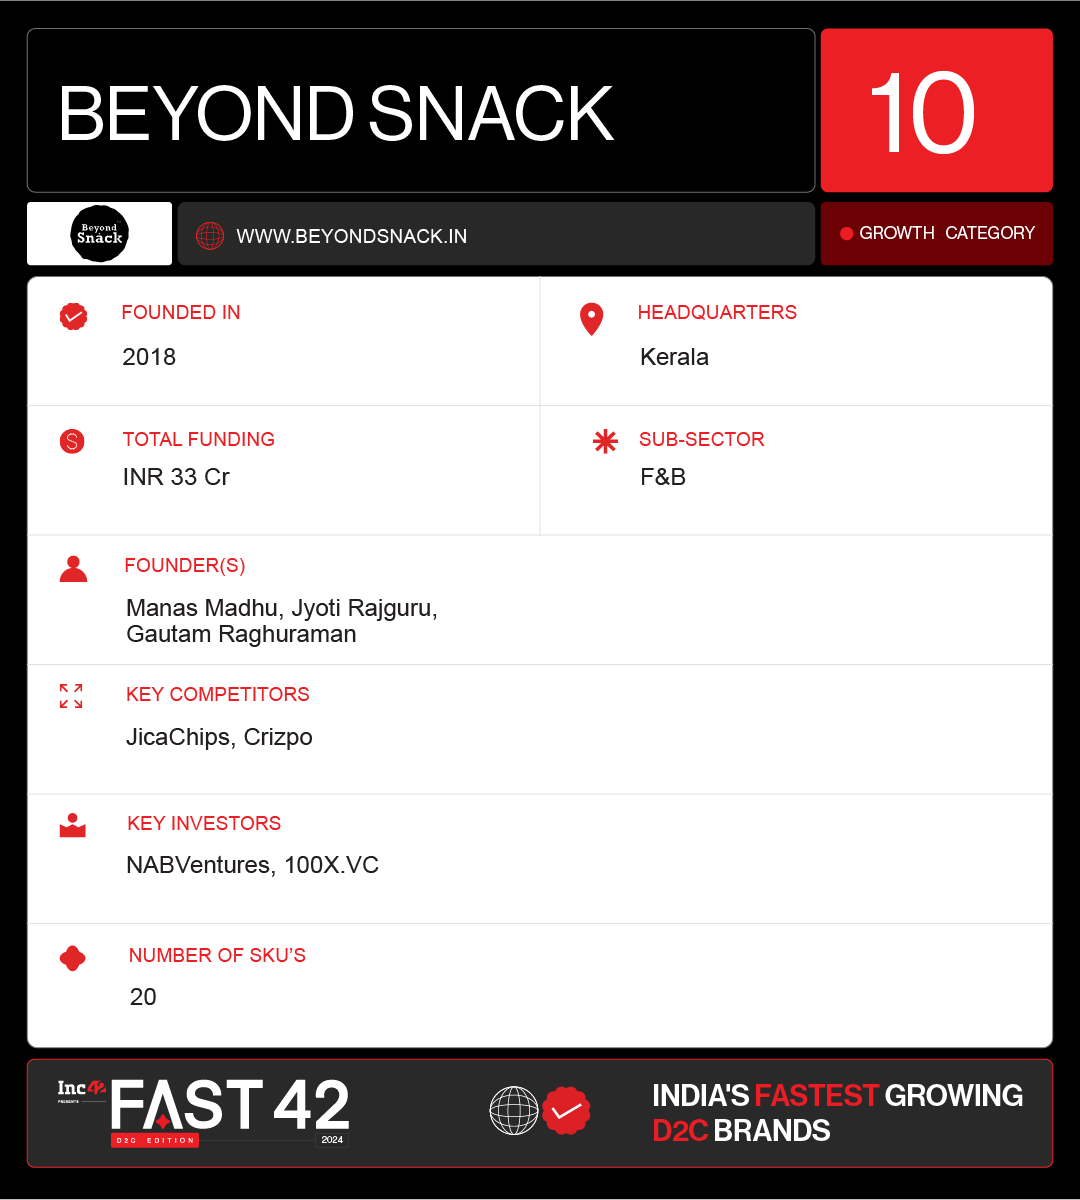 Beyond Snack Offers A Flavourful And Guilt-Free Snacking Option